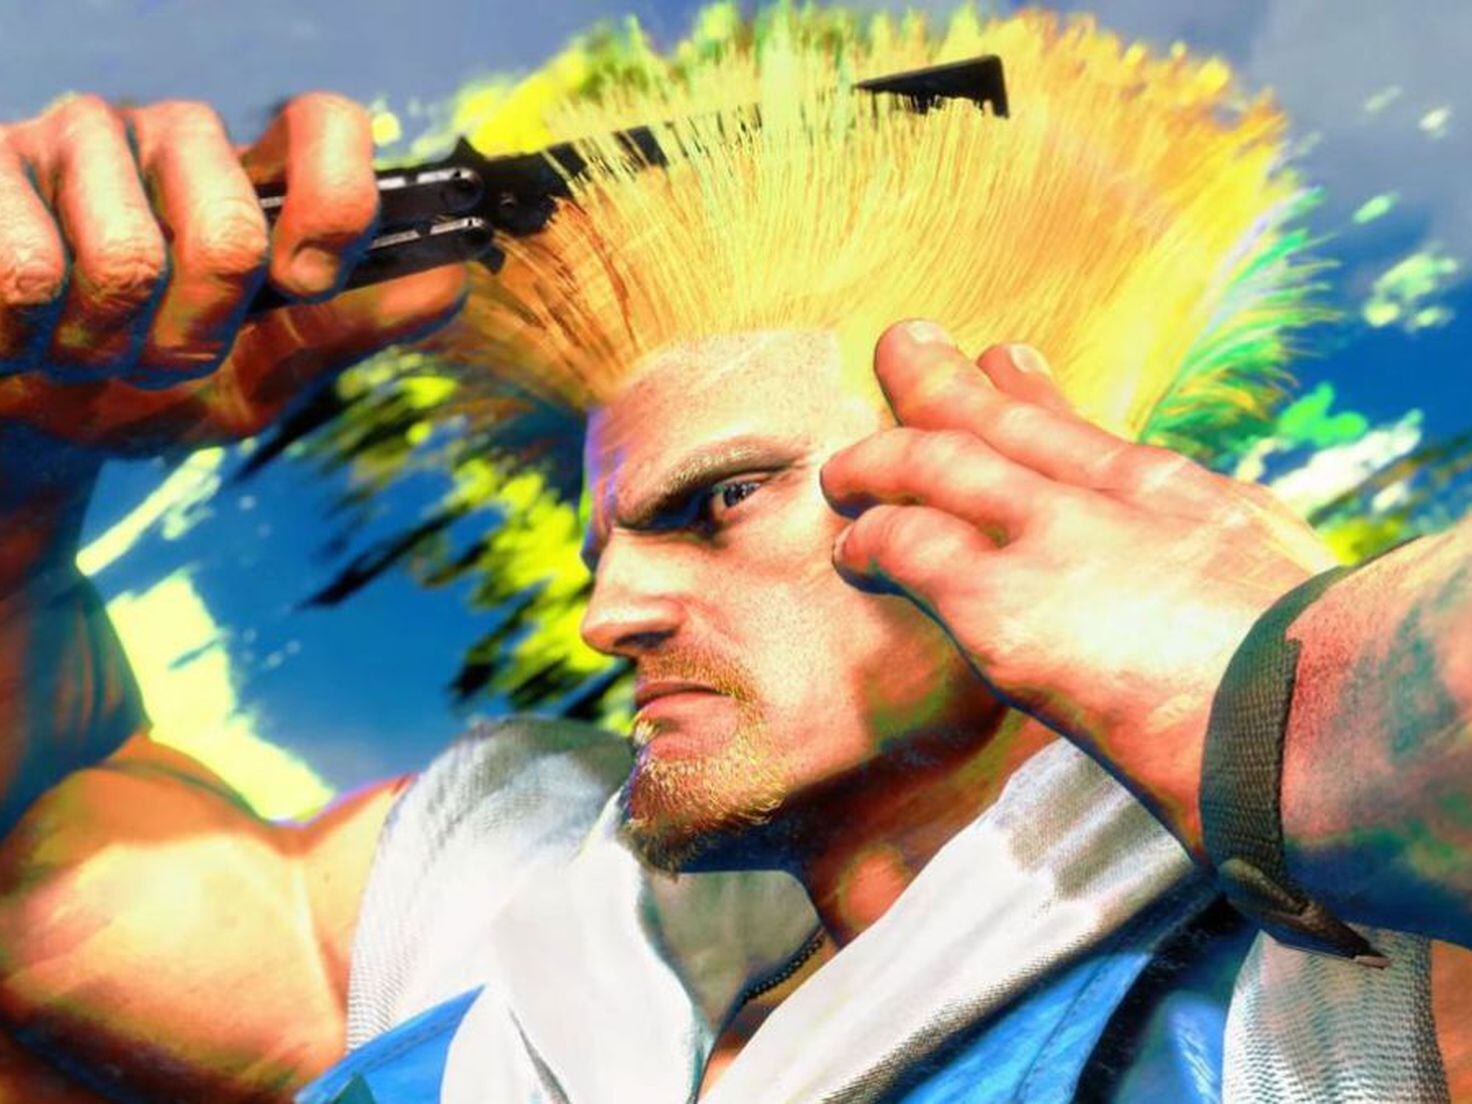 Street Fighter 6 Is Already Steam's Most Played Fighting Game